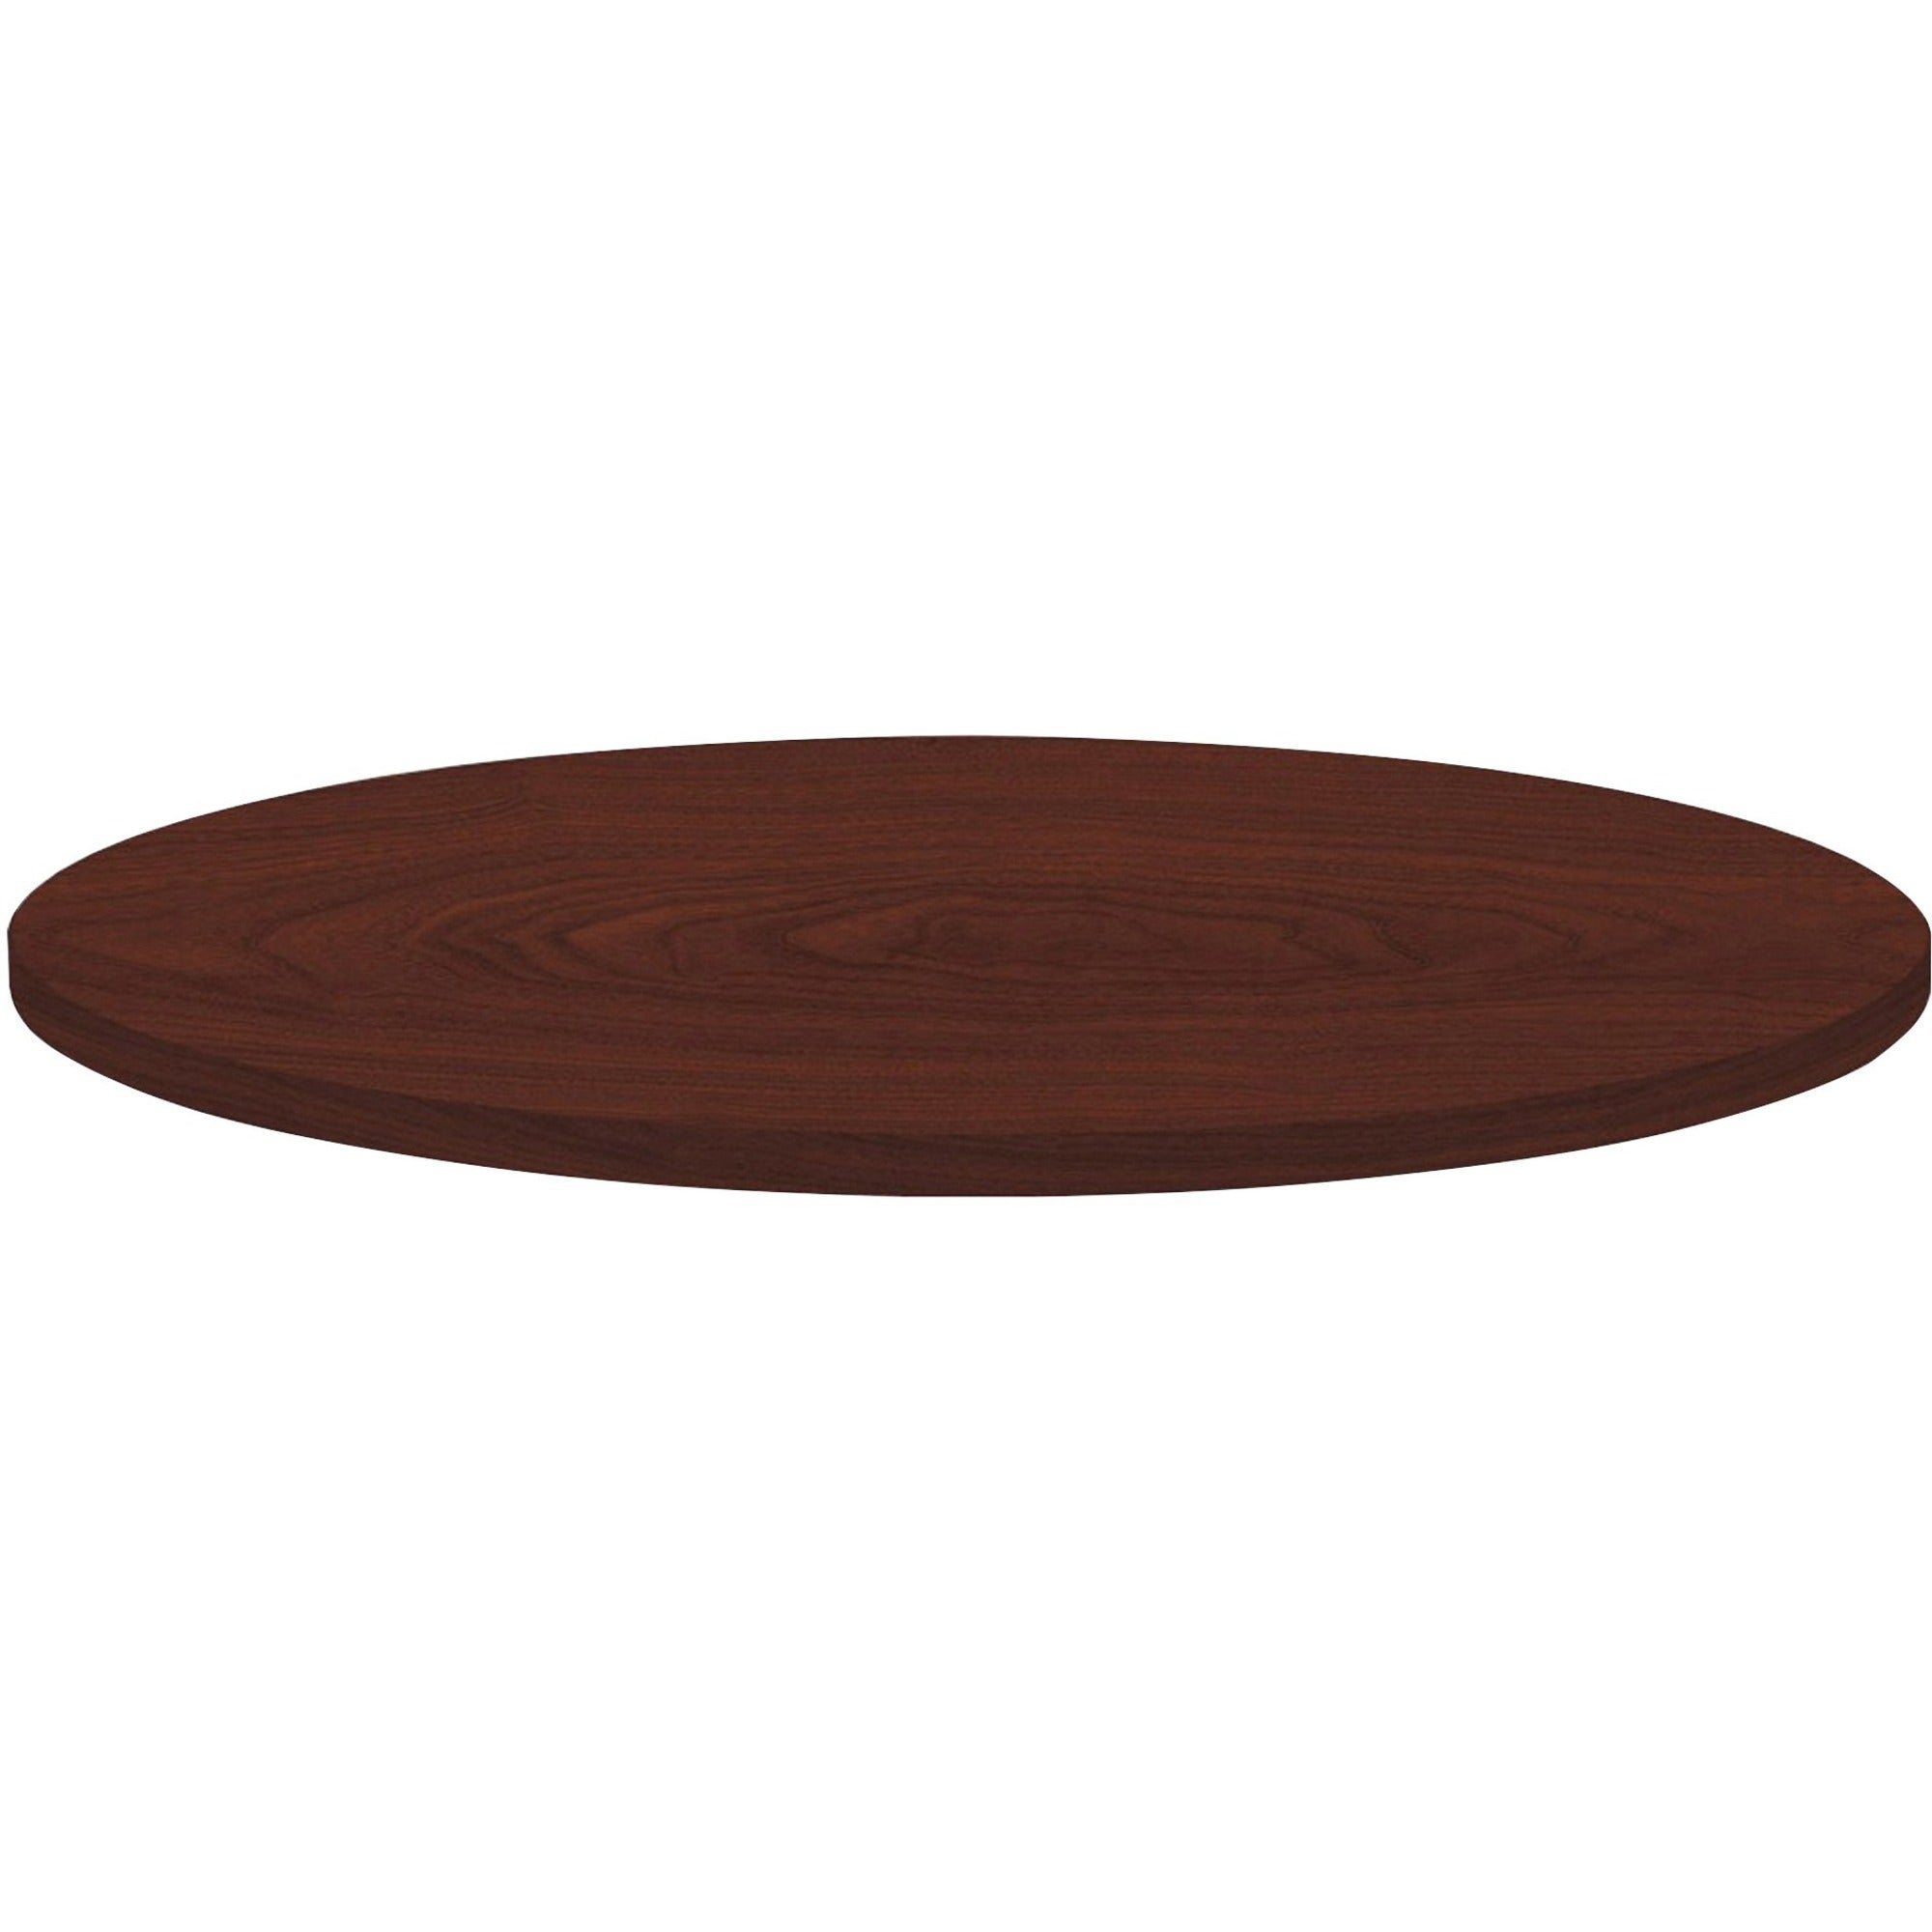 Lorell Hospitality Collection Tabletop - For - Table TopRound Top x 1" Table Top Thickness x 36" Table Top Diameter - Assembly Required - High Pressure Laminate (HPL), Mahogany - Particleboard, Polyvinyl Chloride (PVC) - 1 Each - 